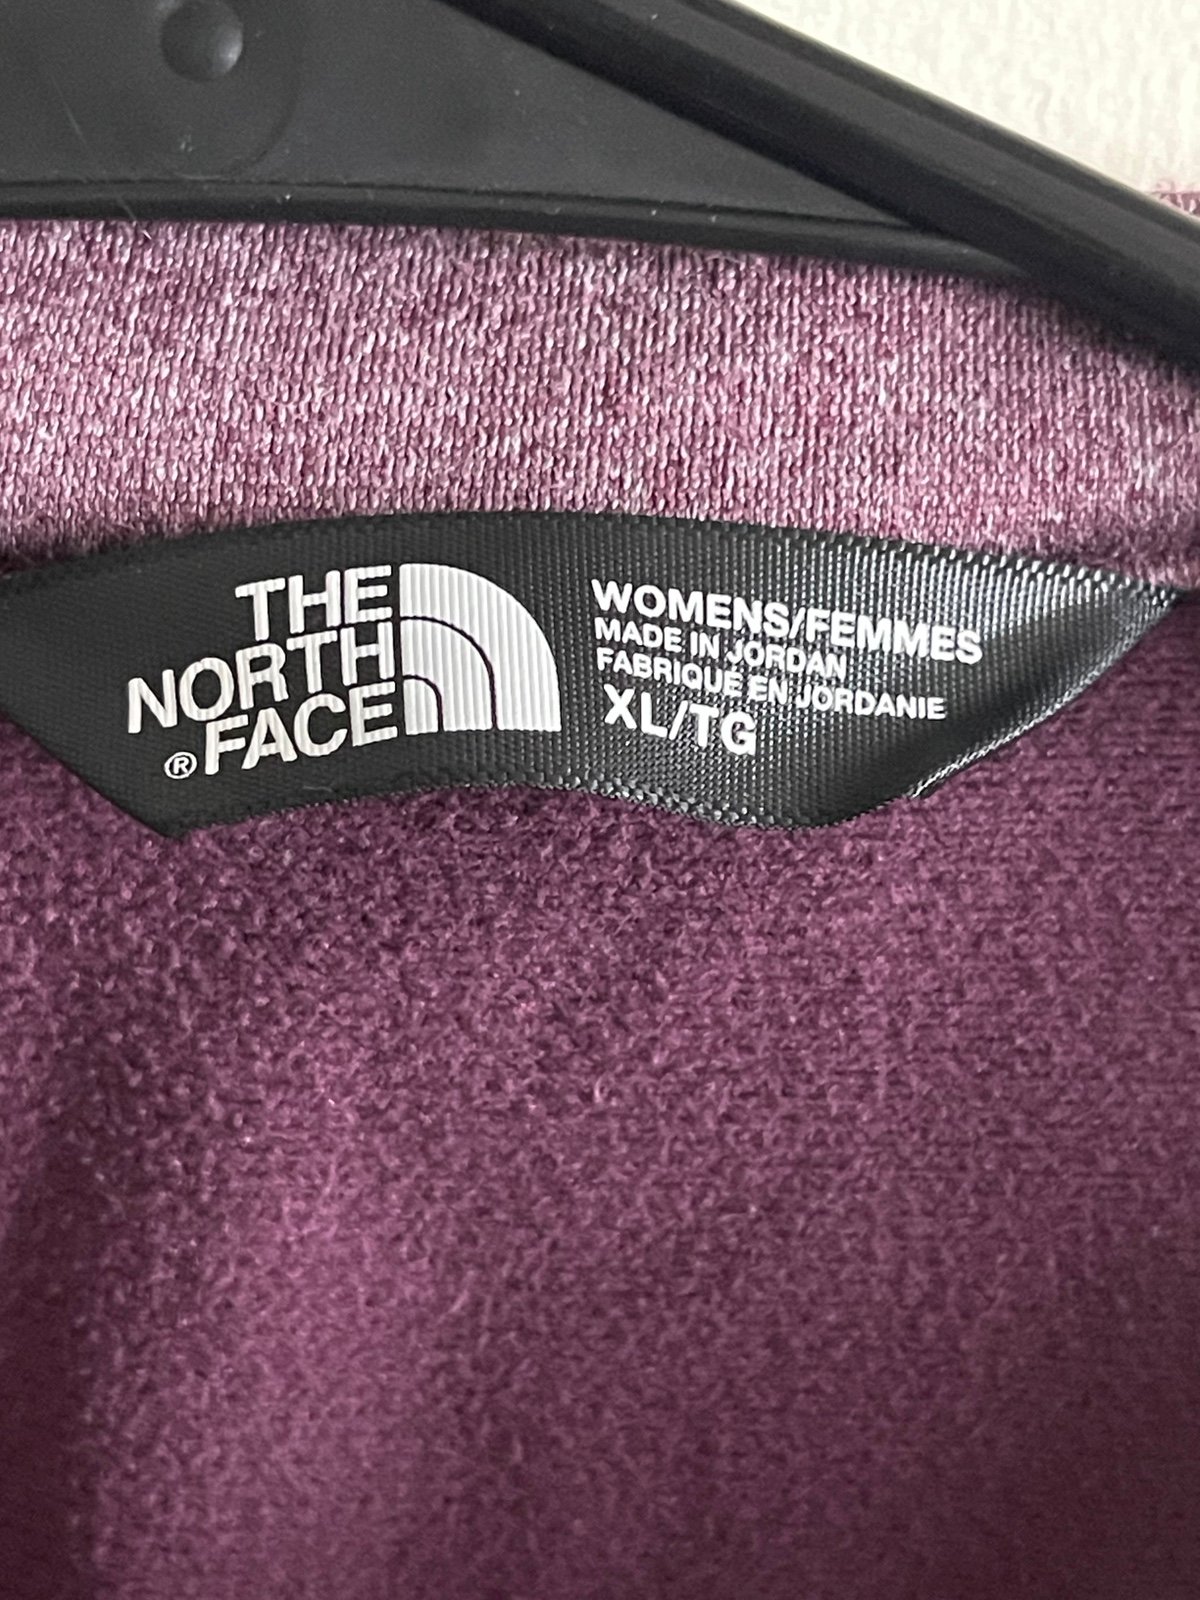 Latest  North face jacket IWaNWNsxB for sale